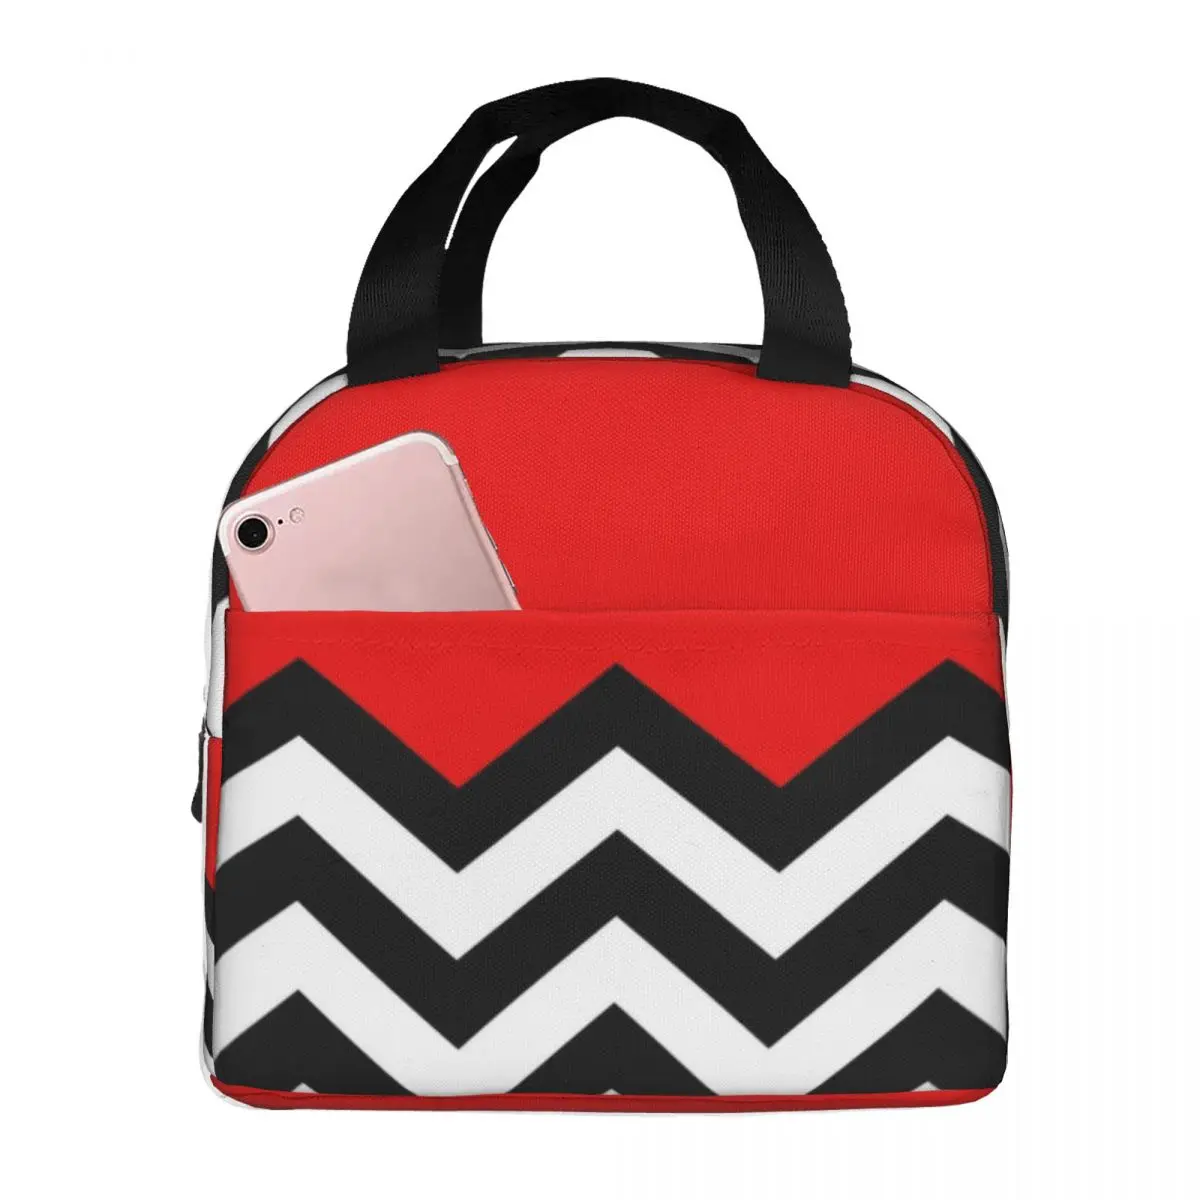 

Twin Peaks Black Lodge Thermal Insulated Lunch Bag Insulated bento bag Meal Container Food Storage Bags cooler Tote Lunch Box